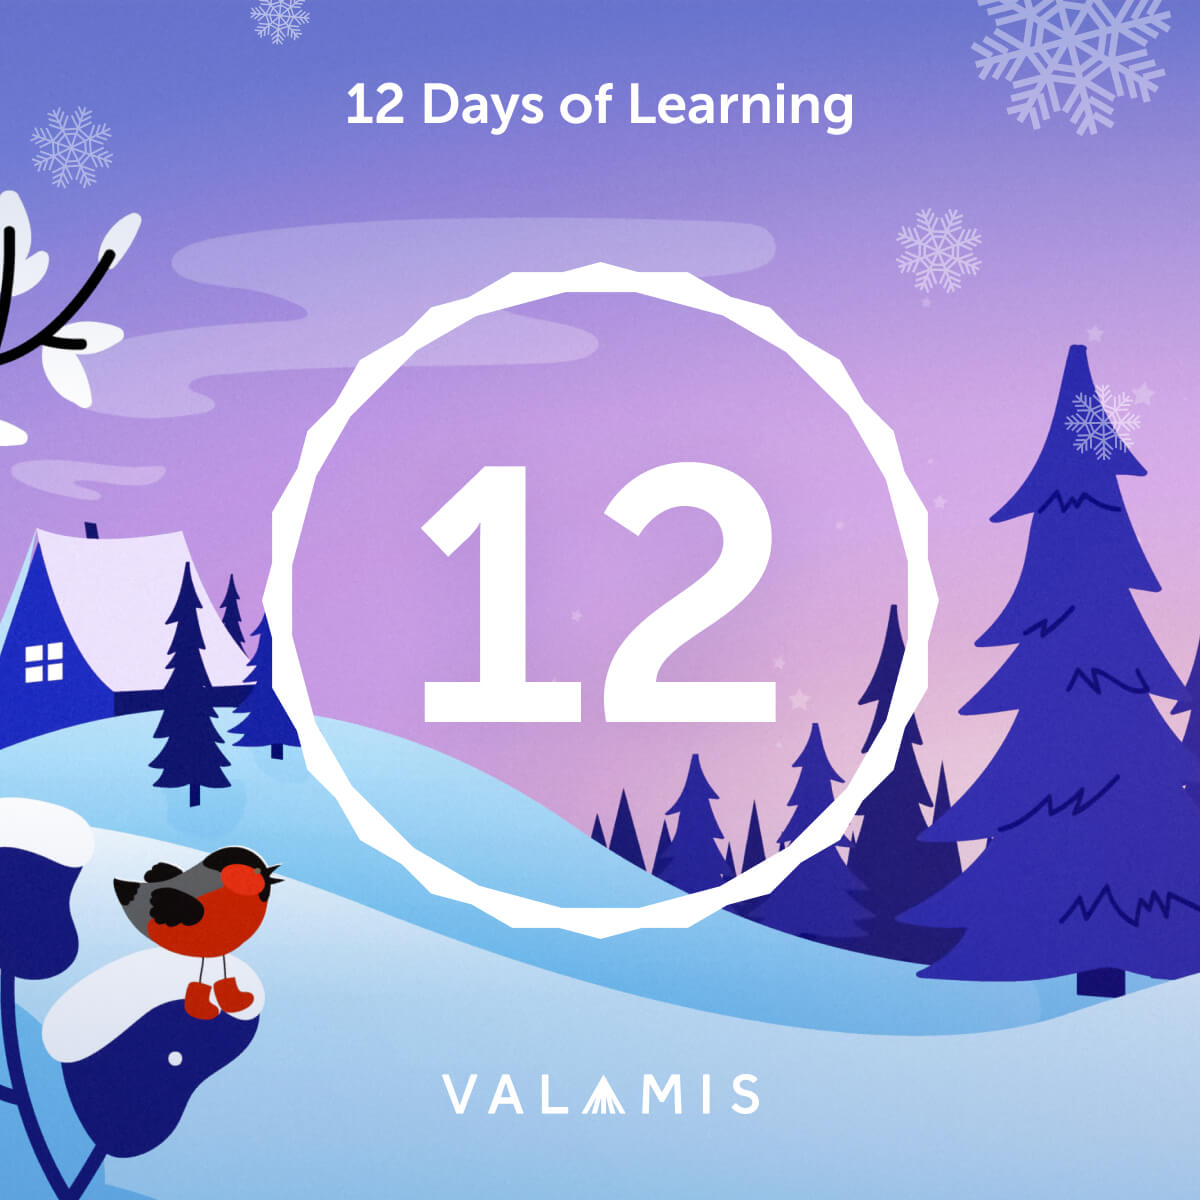 And on the 12th day of Christmas from ALL  - Association for Language  Learning